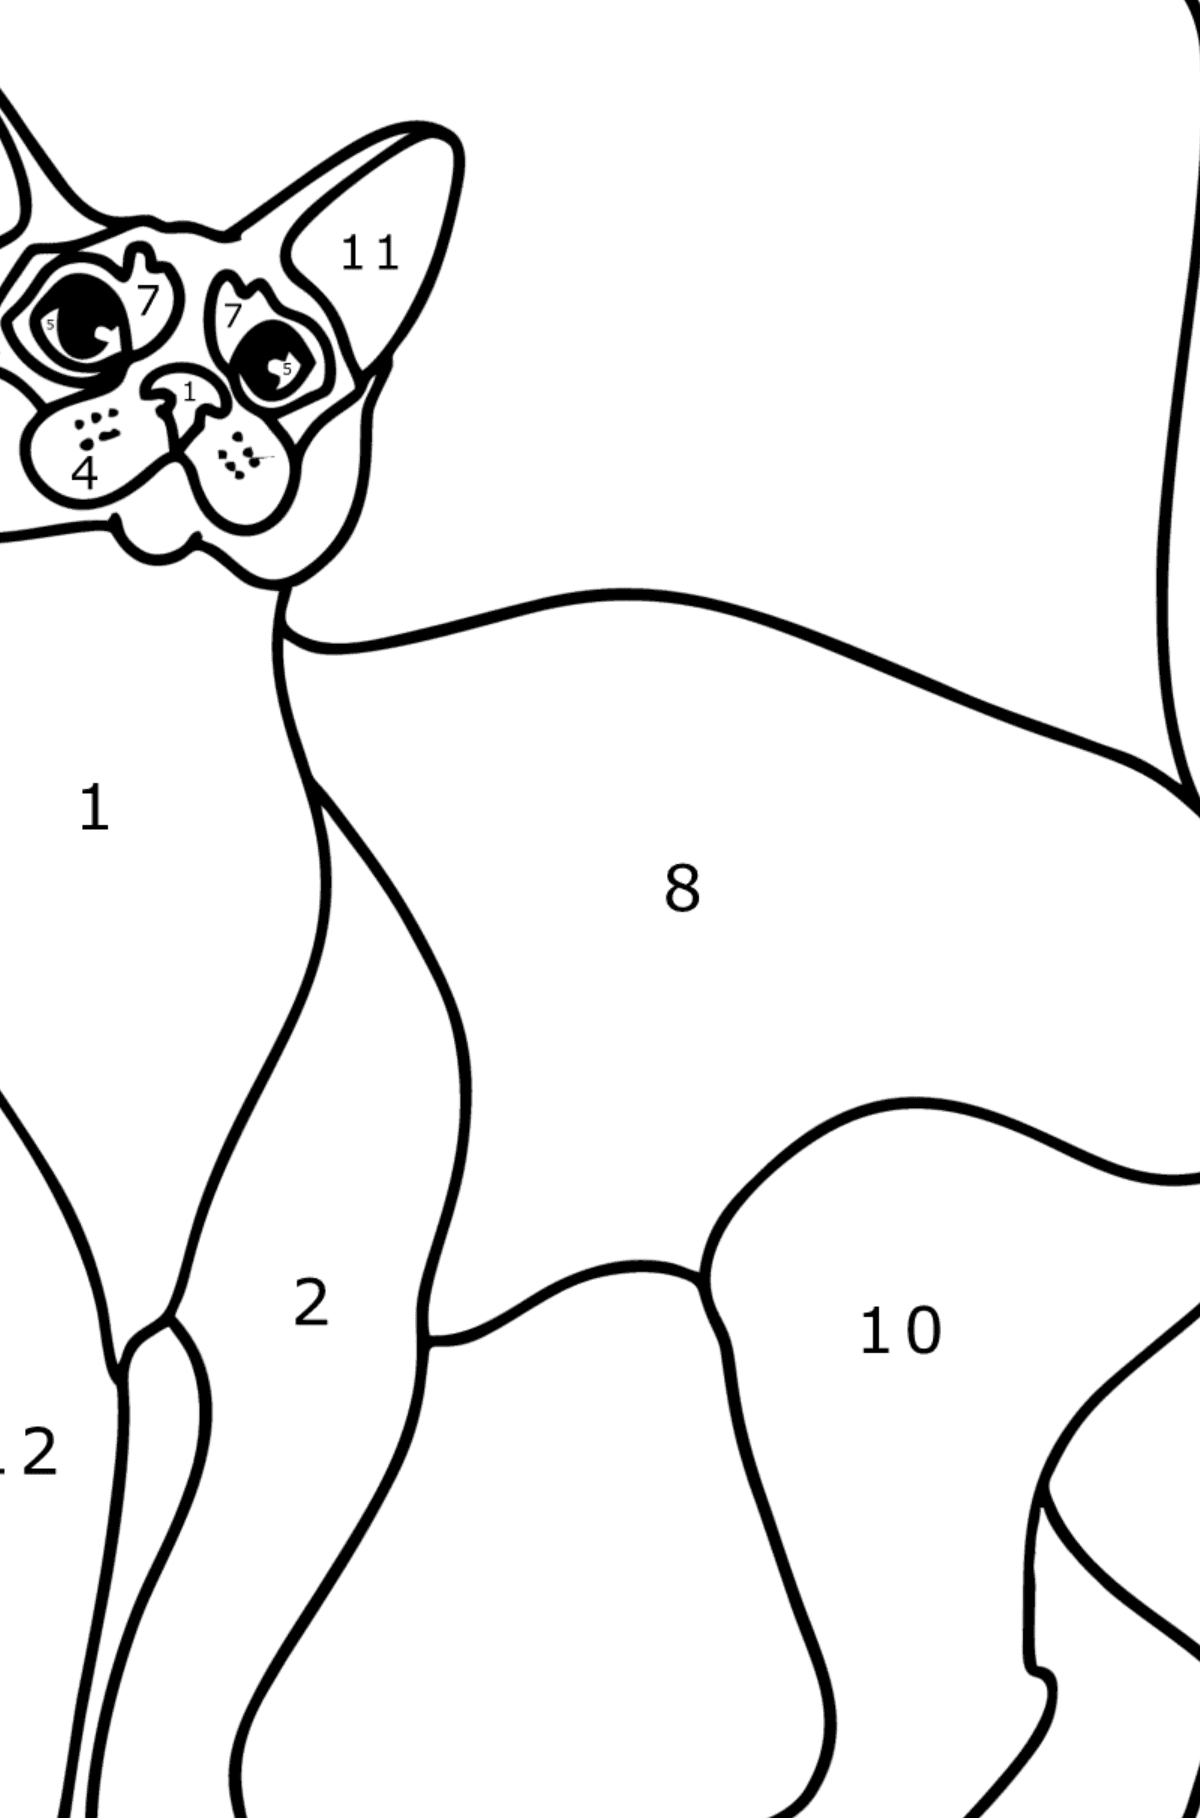 Abyssinian Cat coloring page - Coloring by Numbers for Kids